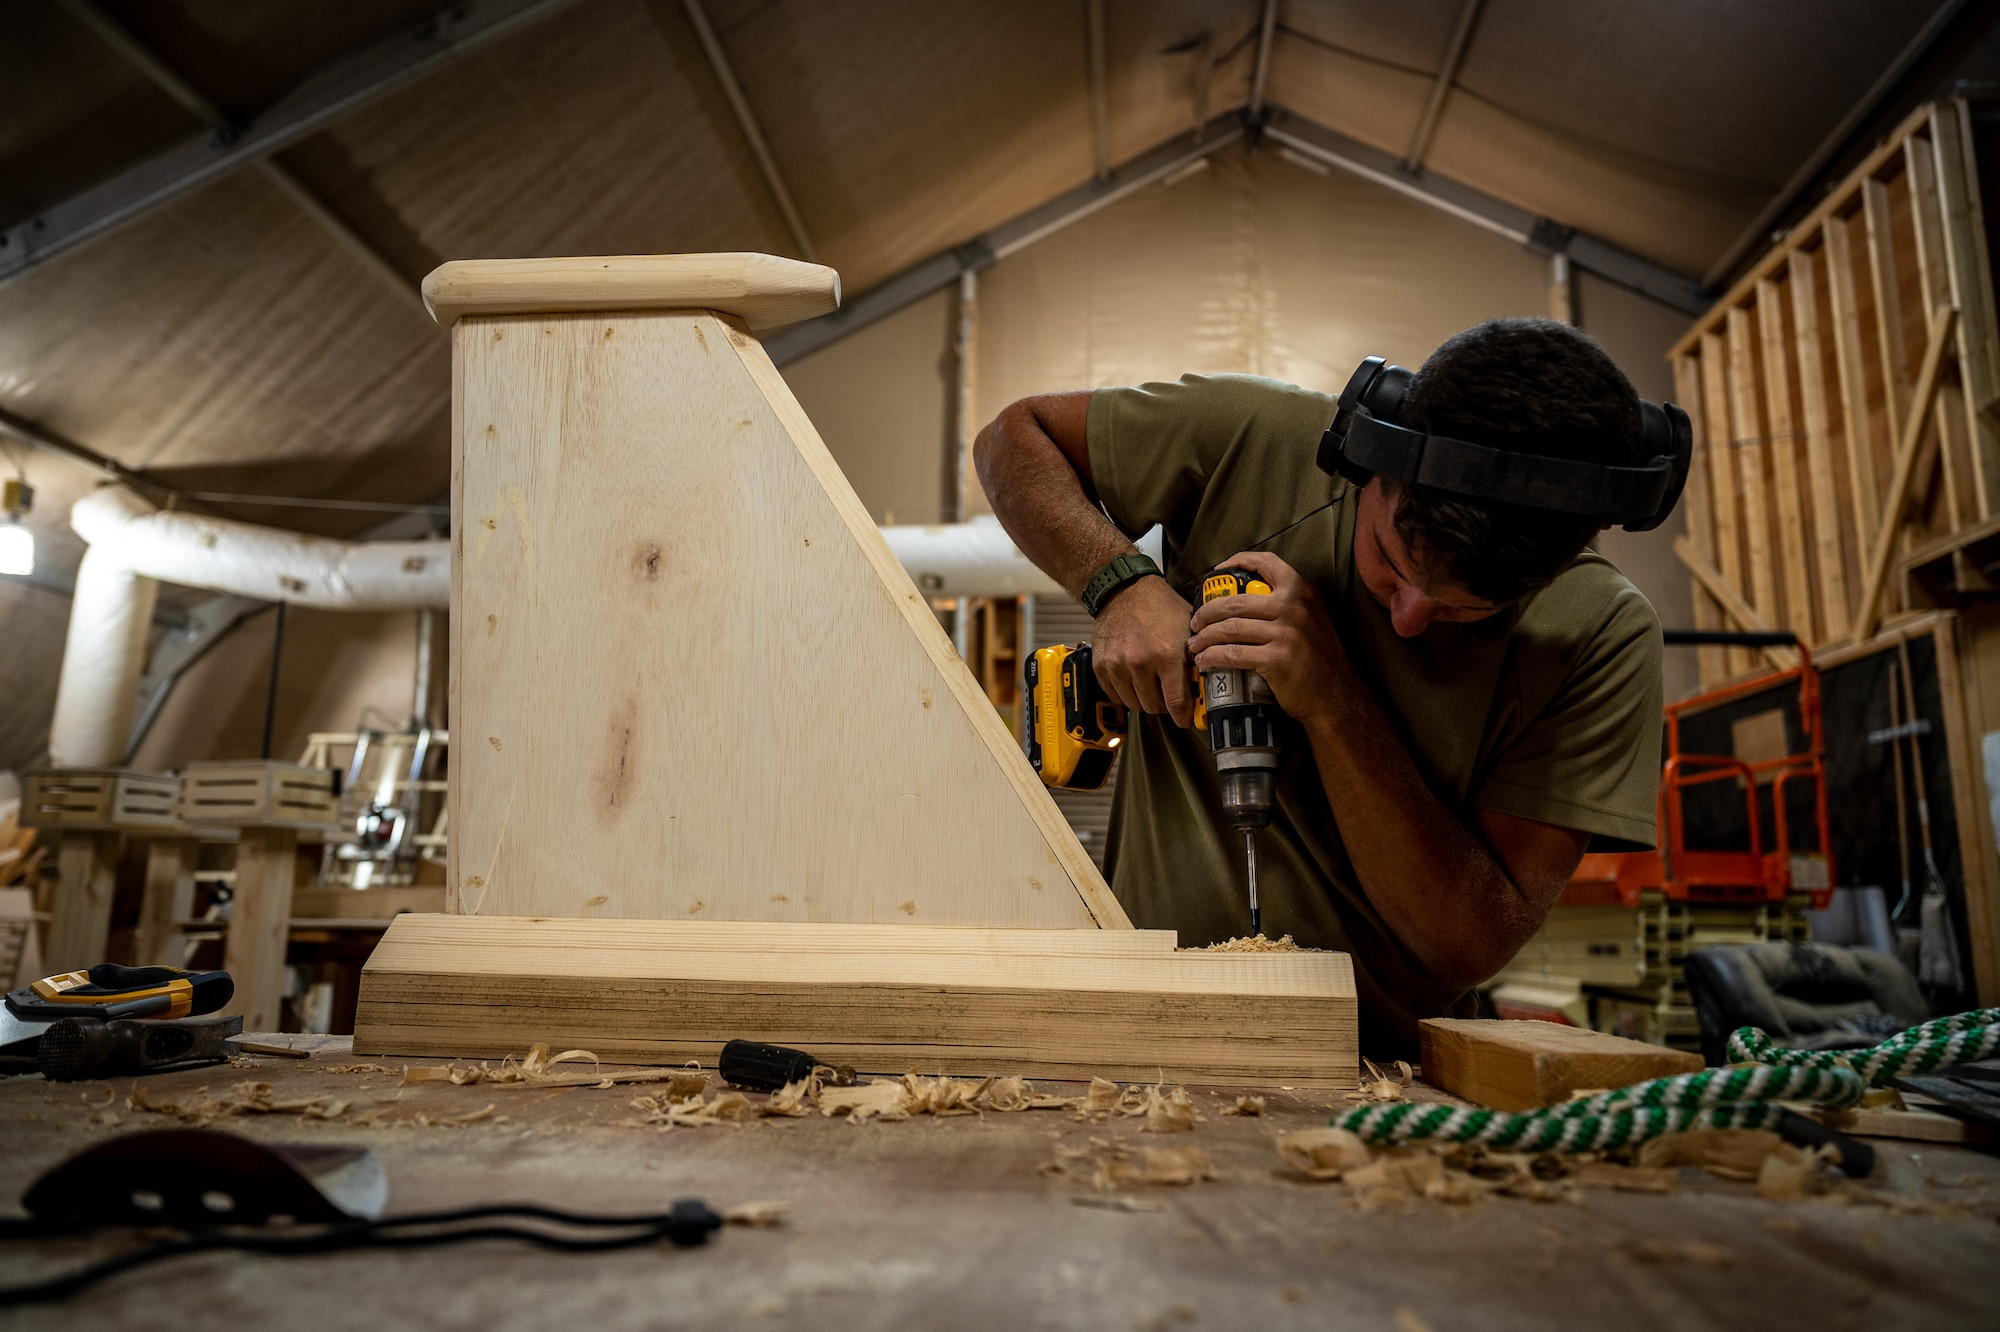 Airman First Class Bryson Doll, 332d Civil Engineer Squadron structural apprentice, drills into the base of a woodworking project at an undisclosed location in Southwest Asia, May 21, 2022. During his deployment, Doll has volunteered 50 hours, before and after work, on various woodworking projects that include bag toss boards, a bench crafted from a shipping palate, a picnic table, a tail fin coin holder, and several other projects. (U.S. Air Force photo by Master Sgt. Christopher Parr)